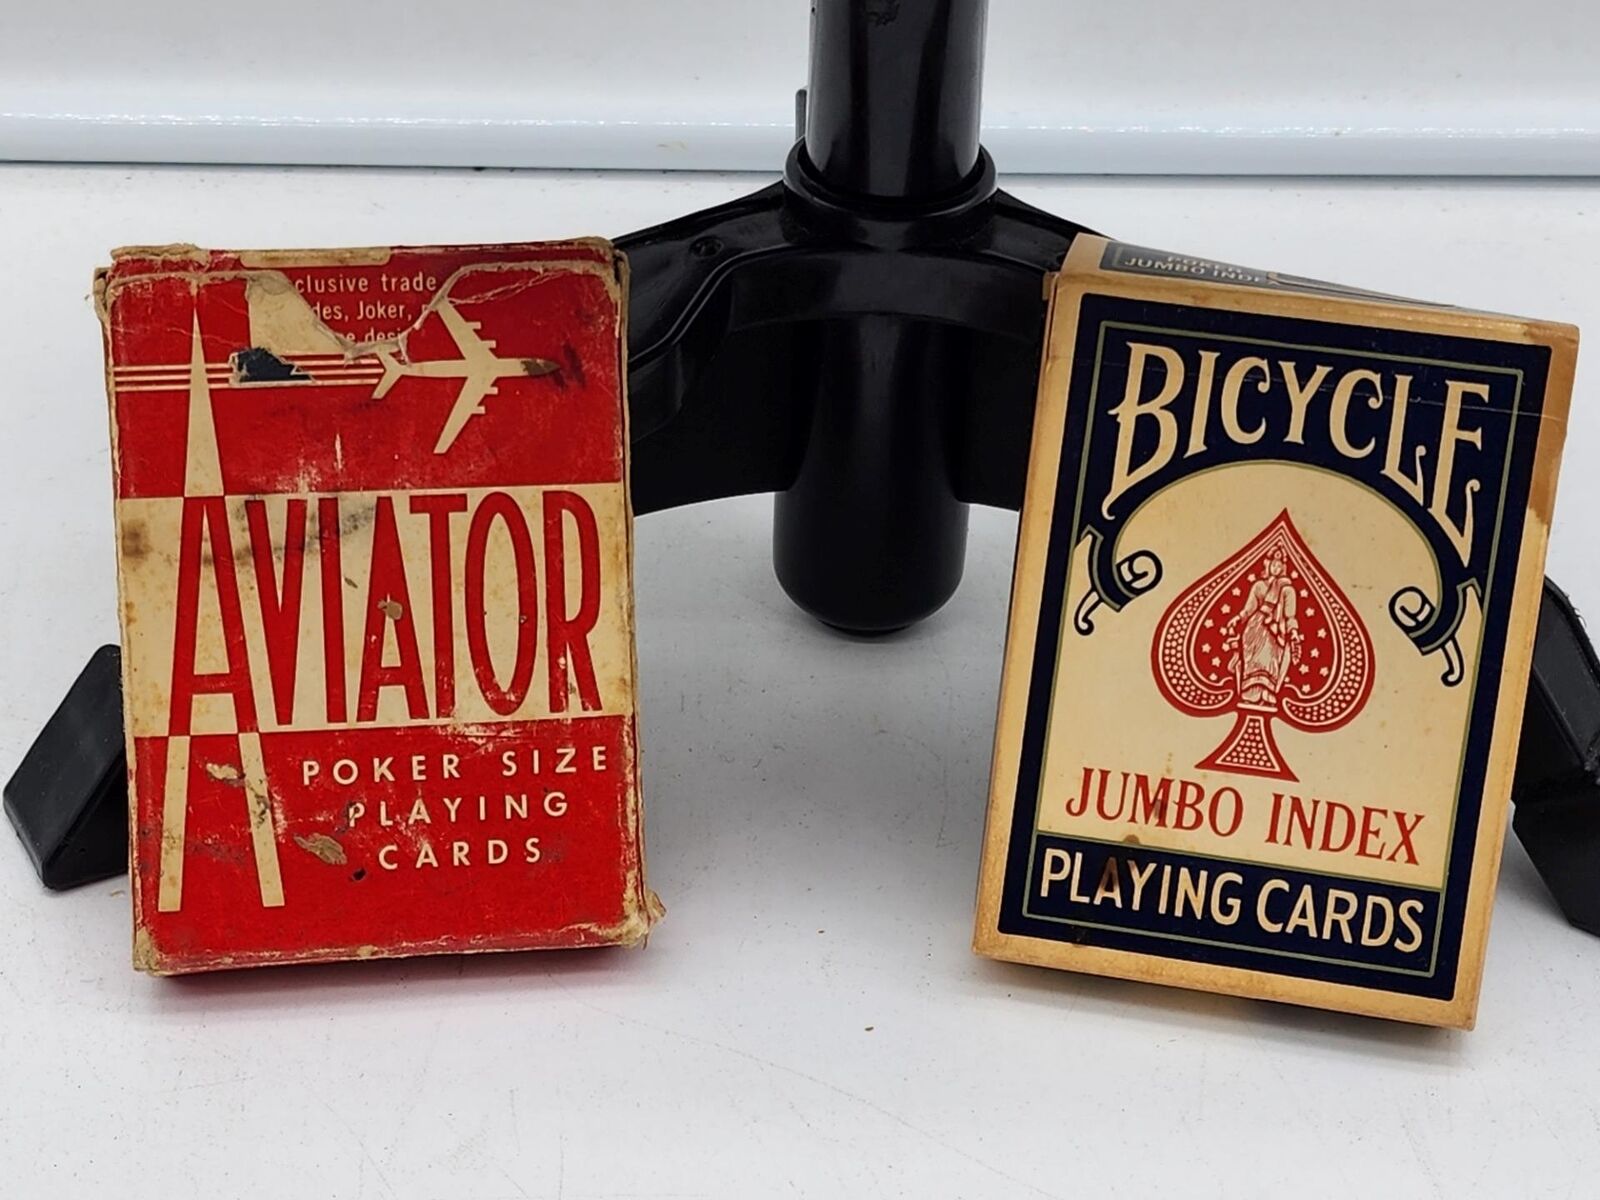 AVIATOR POKER SIZE PLAYING CARDS RED AND BLUE 2 DECKS ONE JUMBO